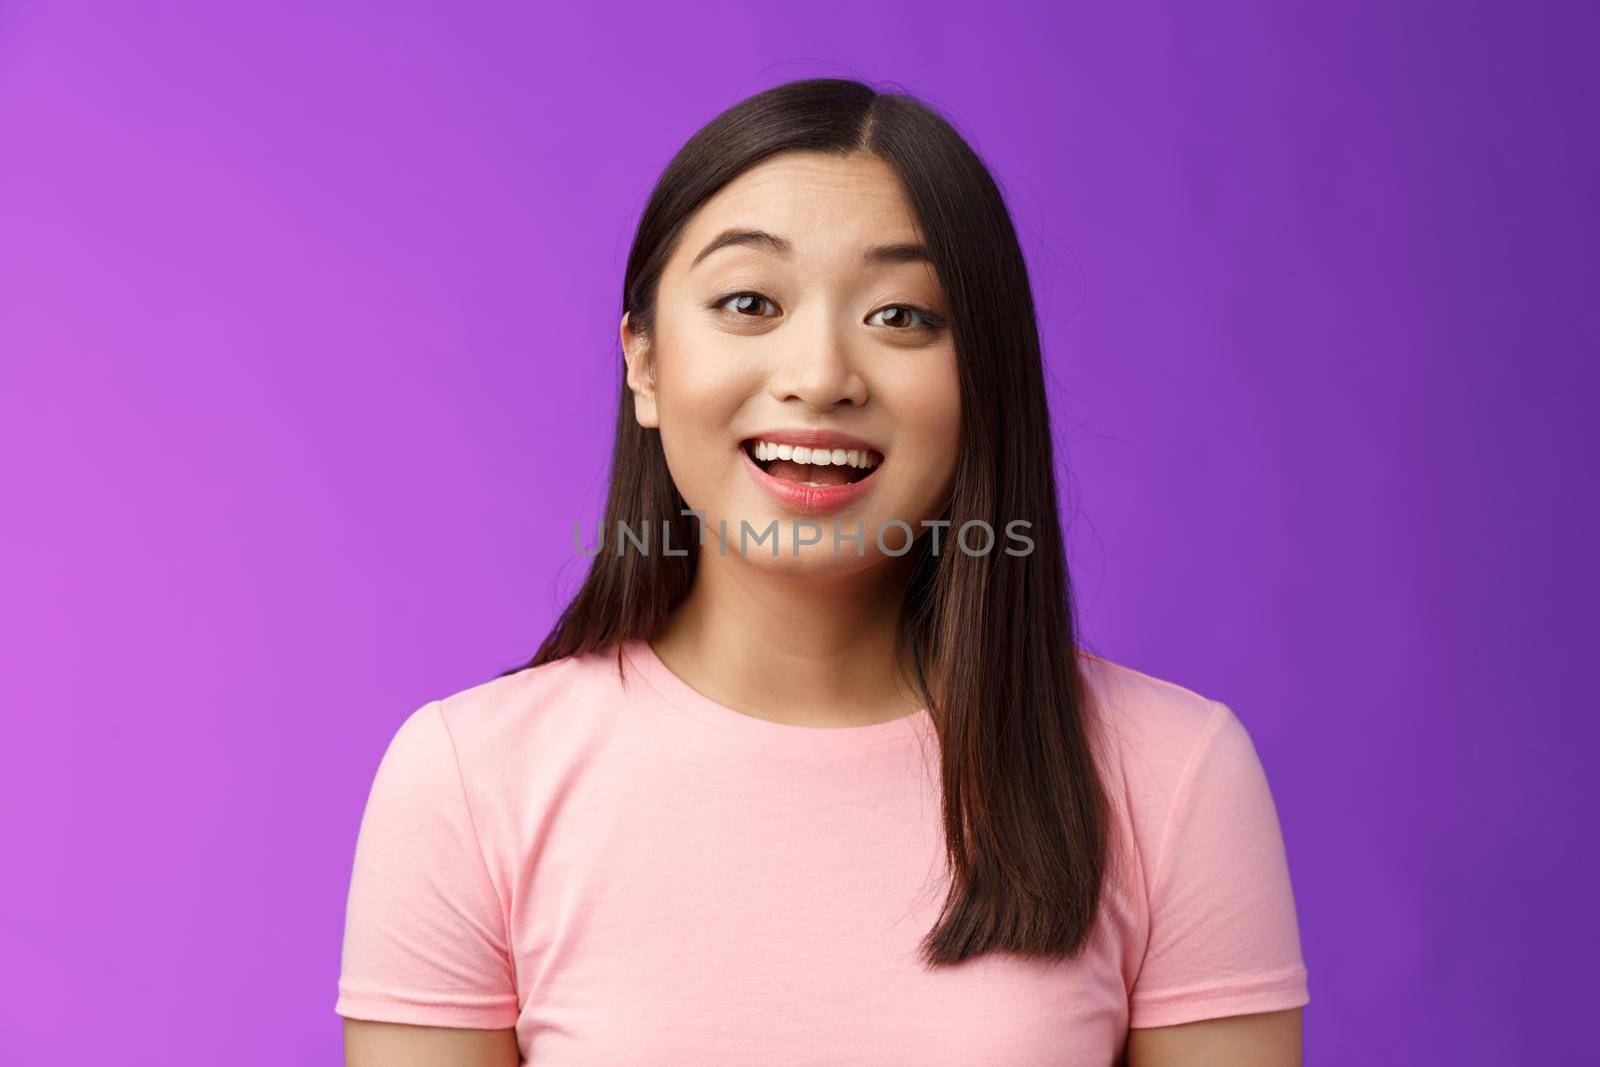 Surprised fascianted cute asian young female raise eyebrows wondered watching amused incredible performance, smiling broadly, happy attend interesting event, stand purple background.